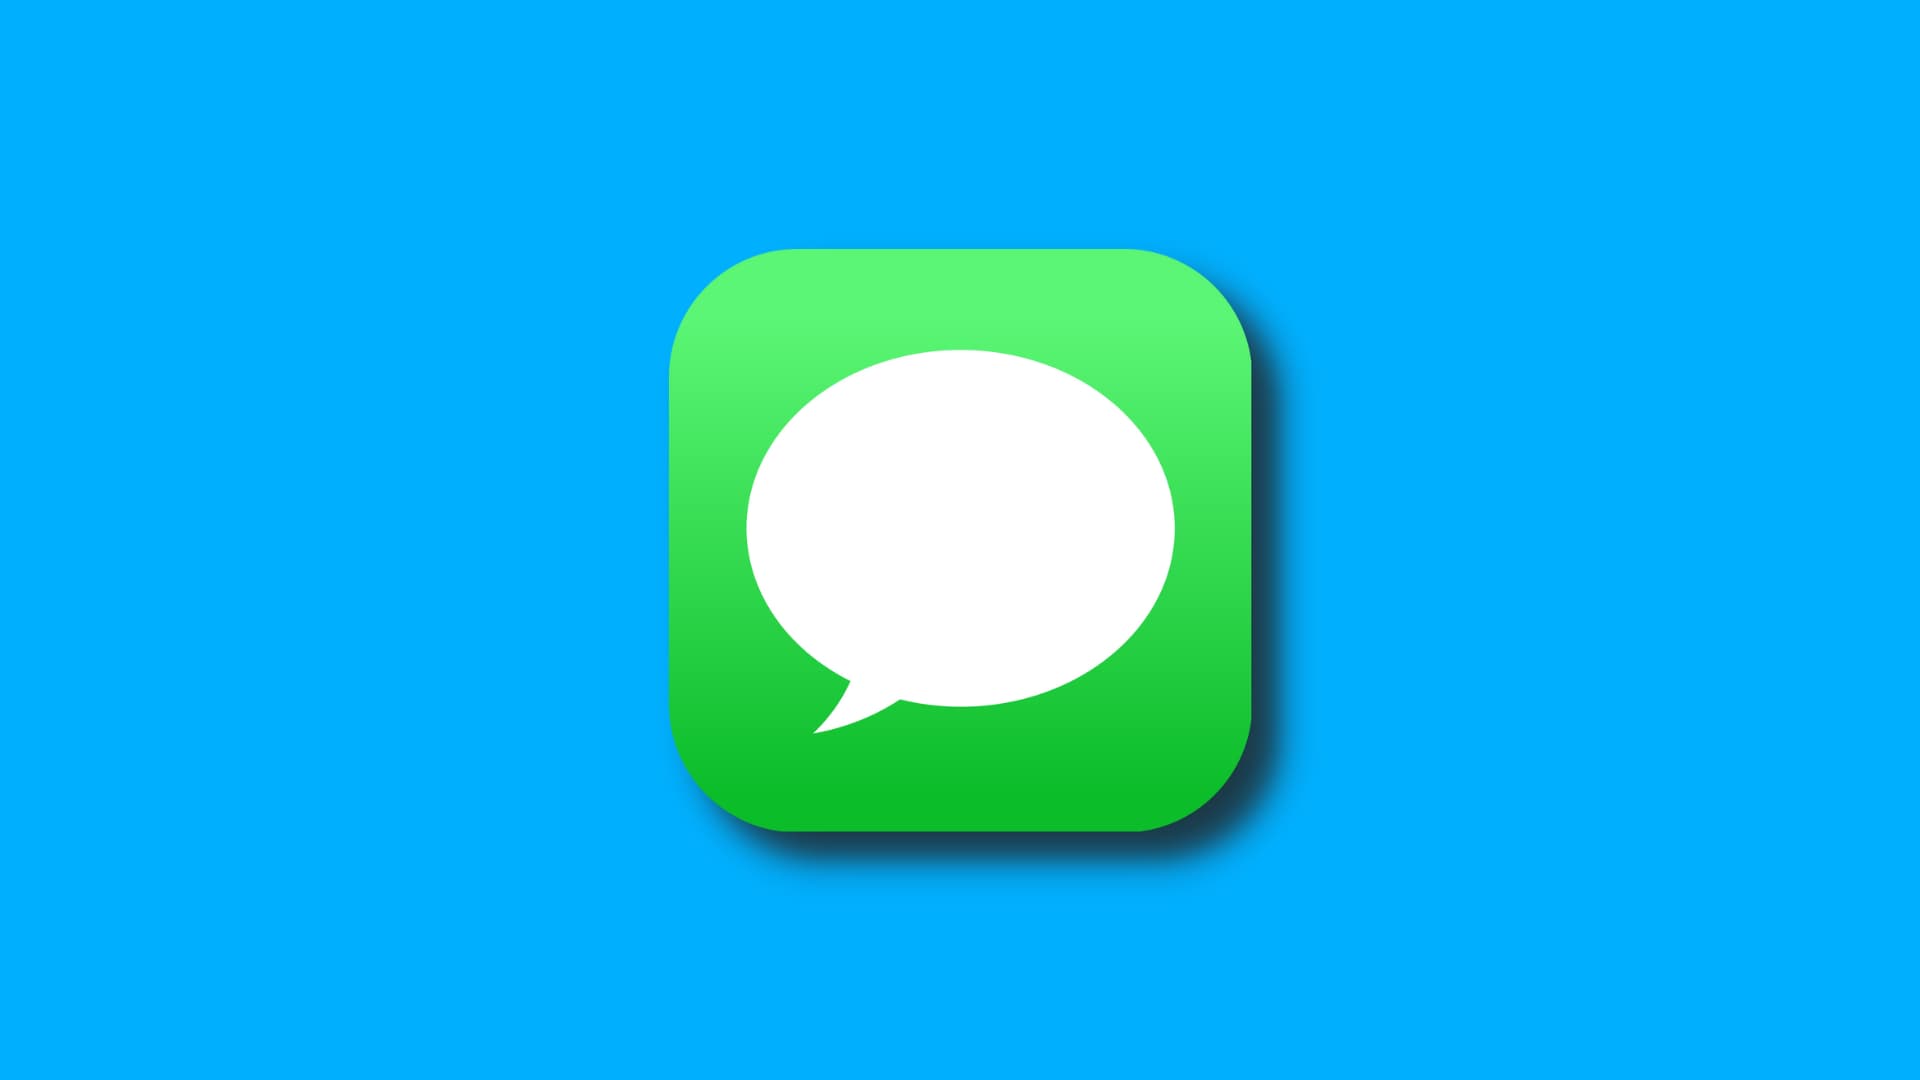 Apple Messages app icon on a solid blue background